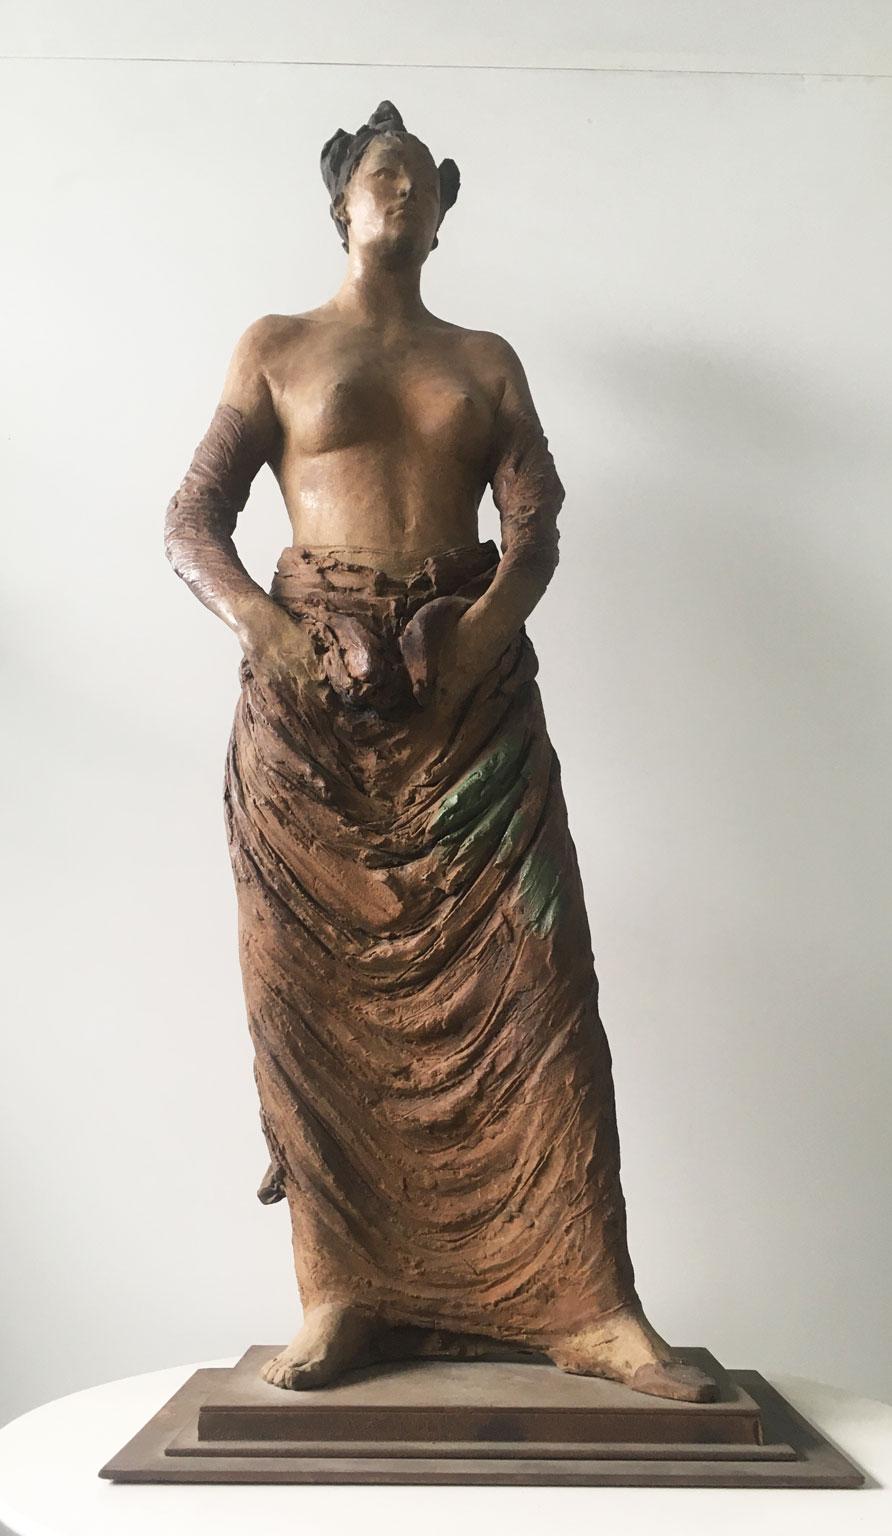 This is an intense bronze sculpture created by the Italian artist Ugo Riva, in 2006. Lost wax bronze on iron basement.
The title of this artwork is 